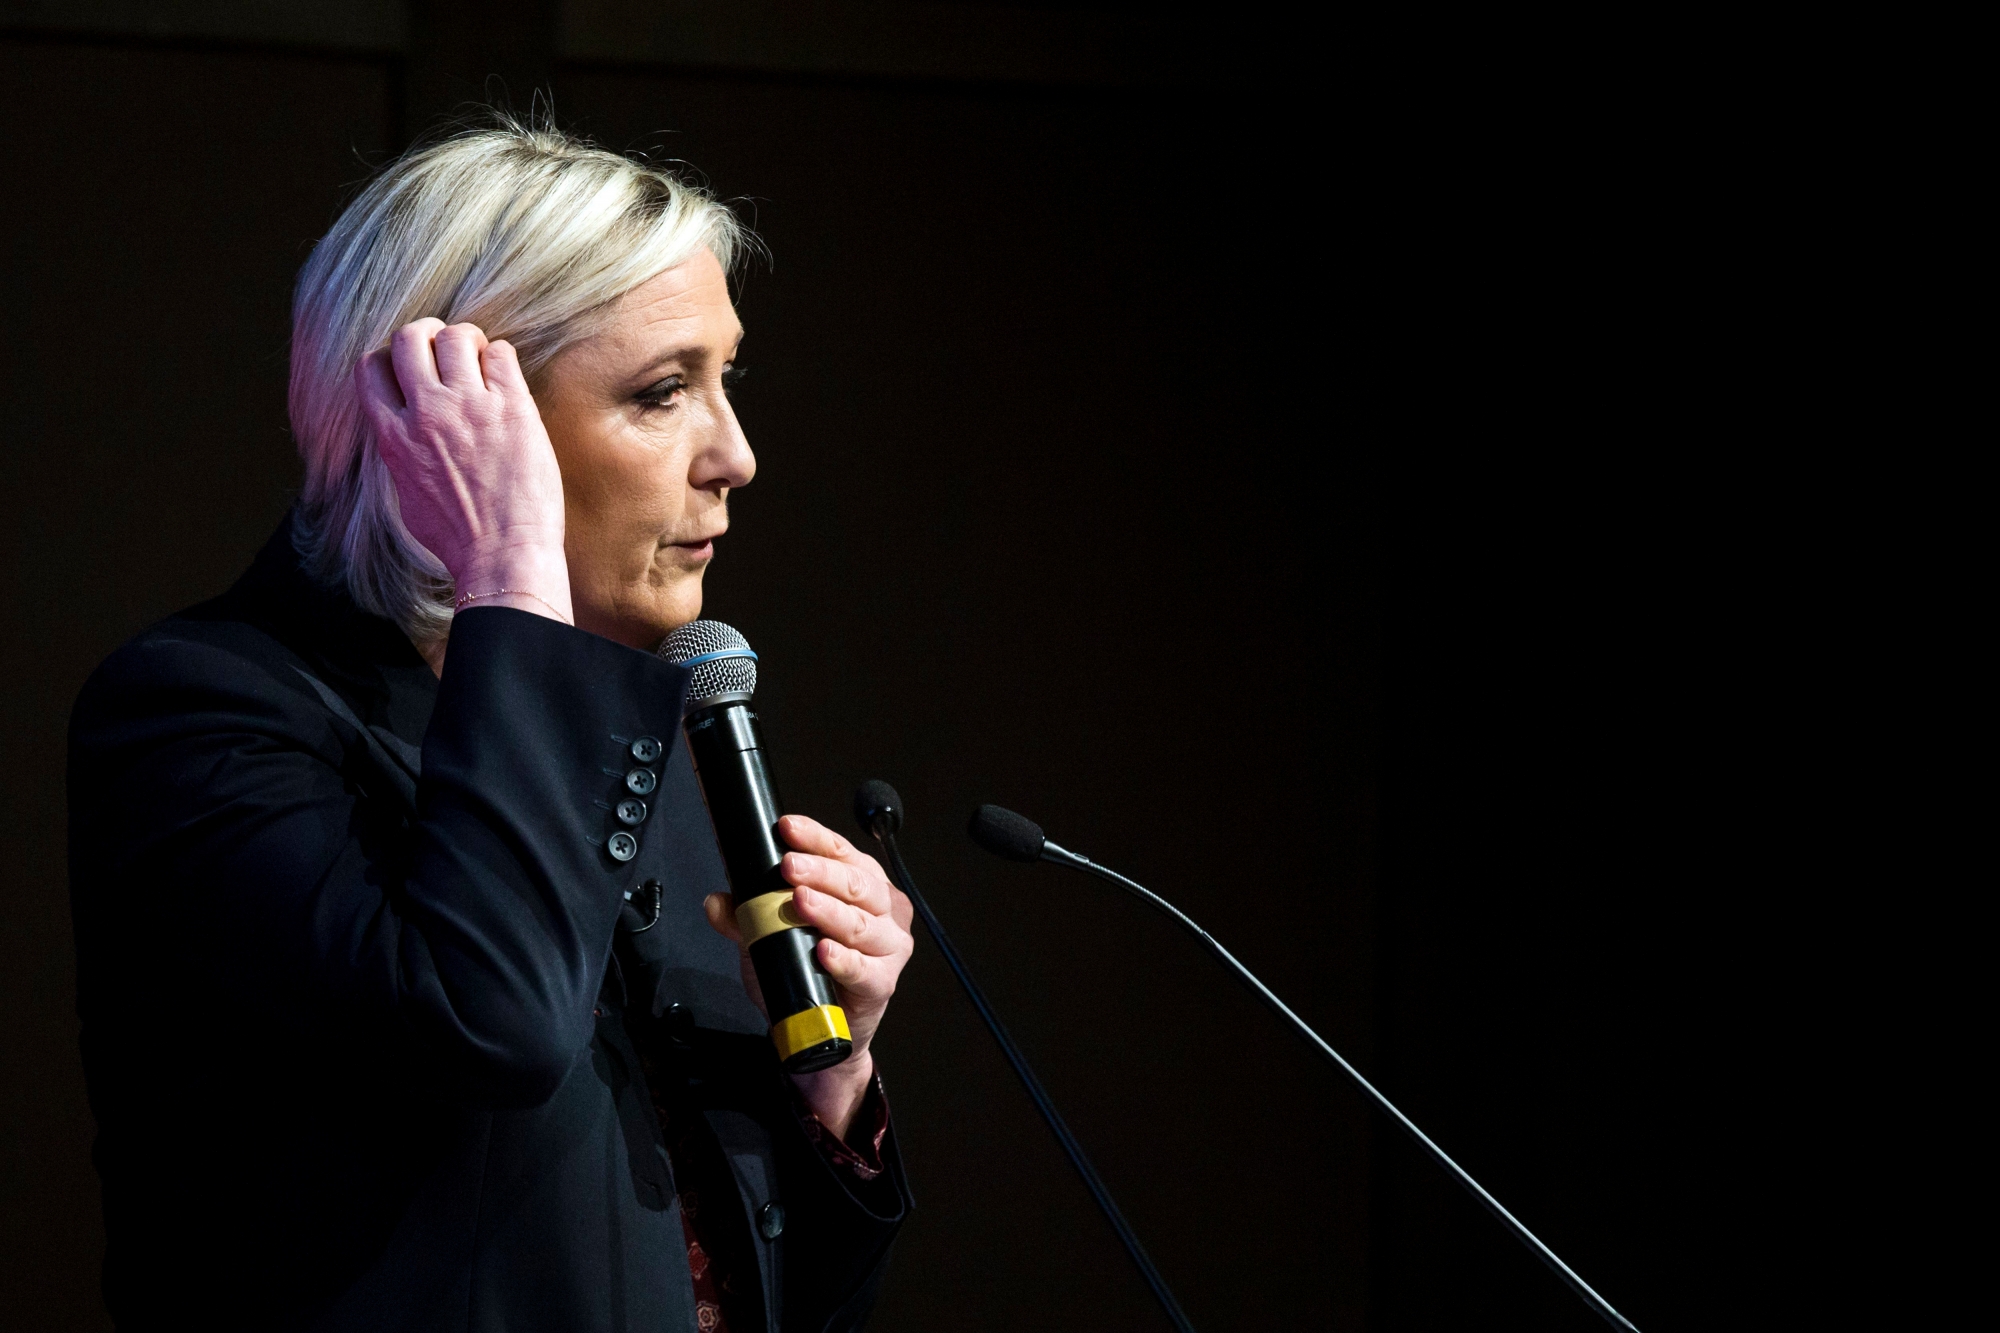 epa05874757 French far-right Front National (FN) party leader and presidential candidate, Marine Le Pen delivers a speech during a meeting organized by the French employers' association MEDEF (Movement of the Enterprises of France) in Paris, France, 28 March 2017. The French presidential election will be held on 23 April 2017.  EPA/ETIENNE LAURENT FRANKREICH WAHLEN PRAESIDENT LE PEN